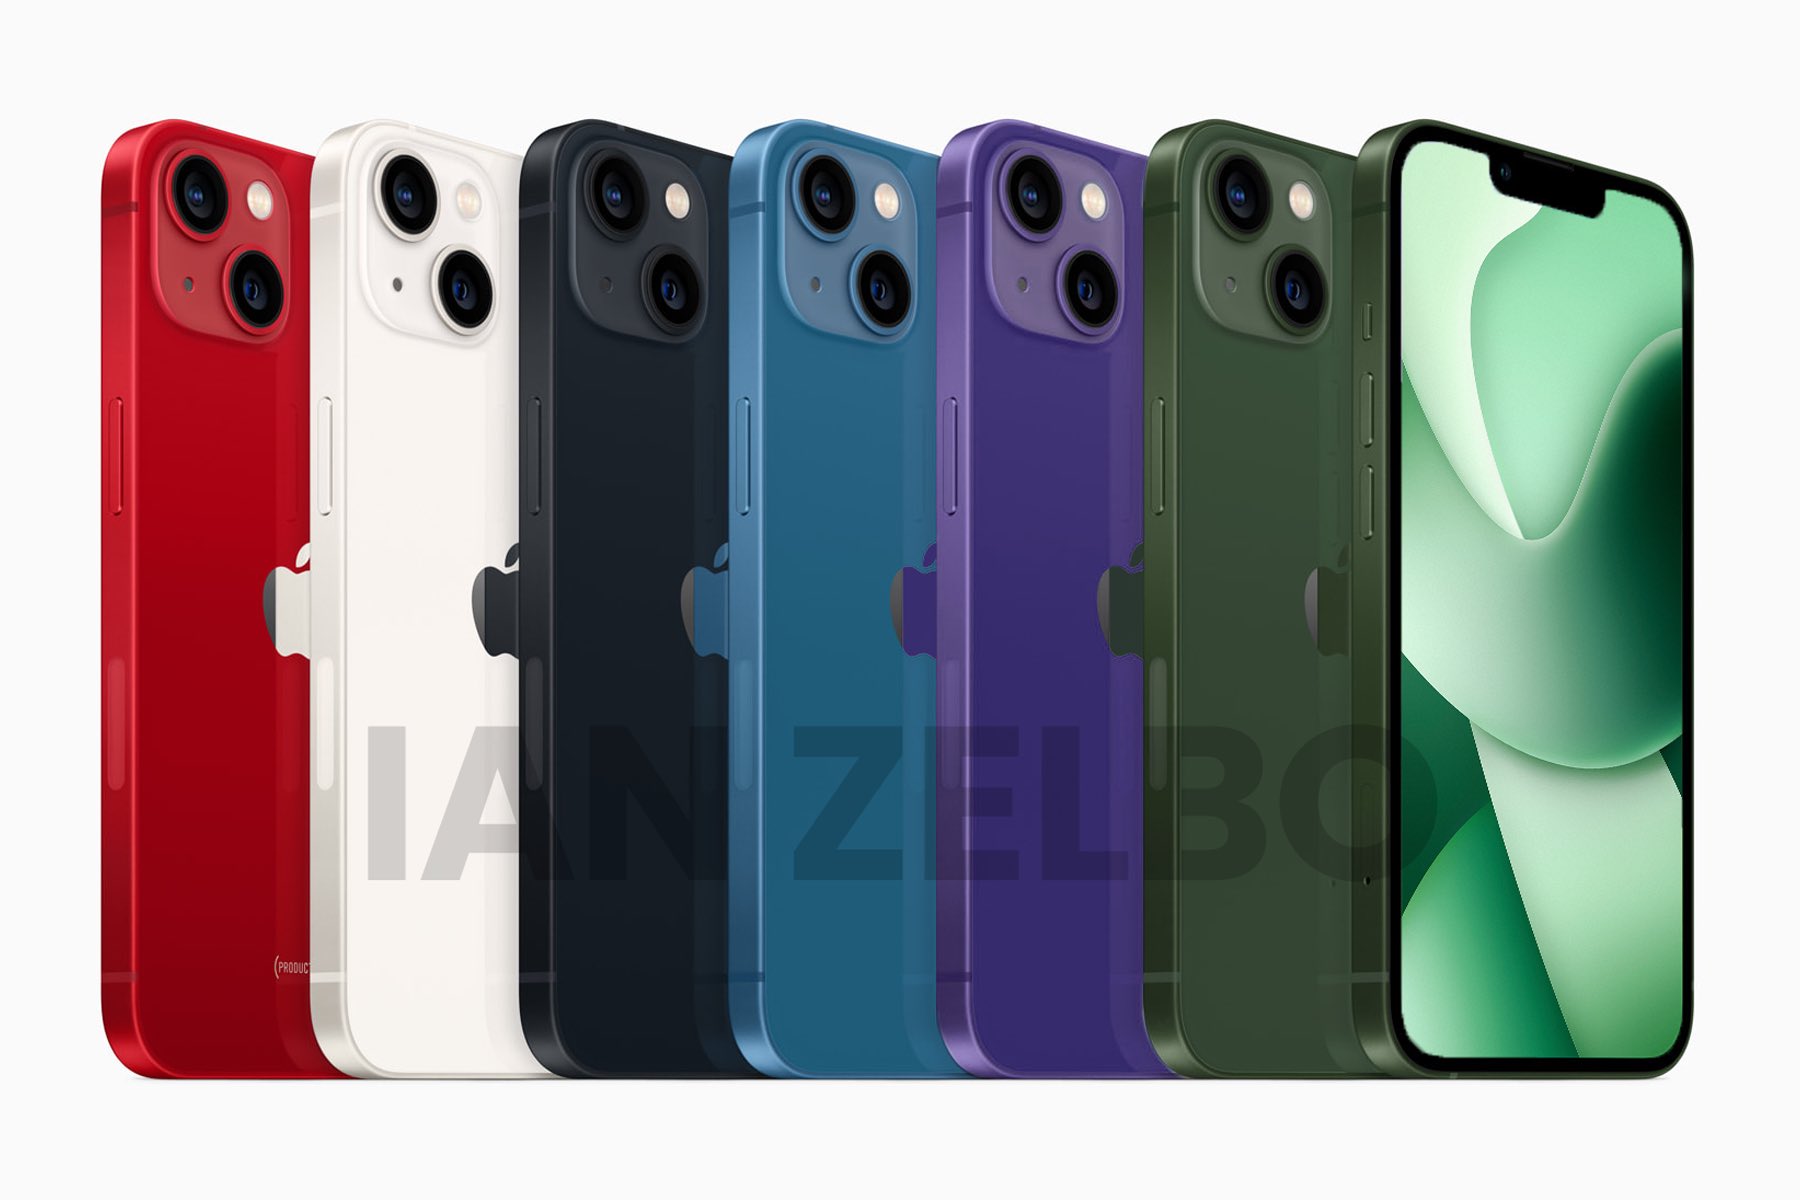 This iPhone 14 color lineup has us hyped for Apple’s September event next week